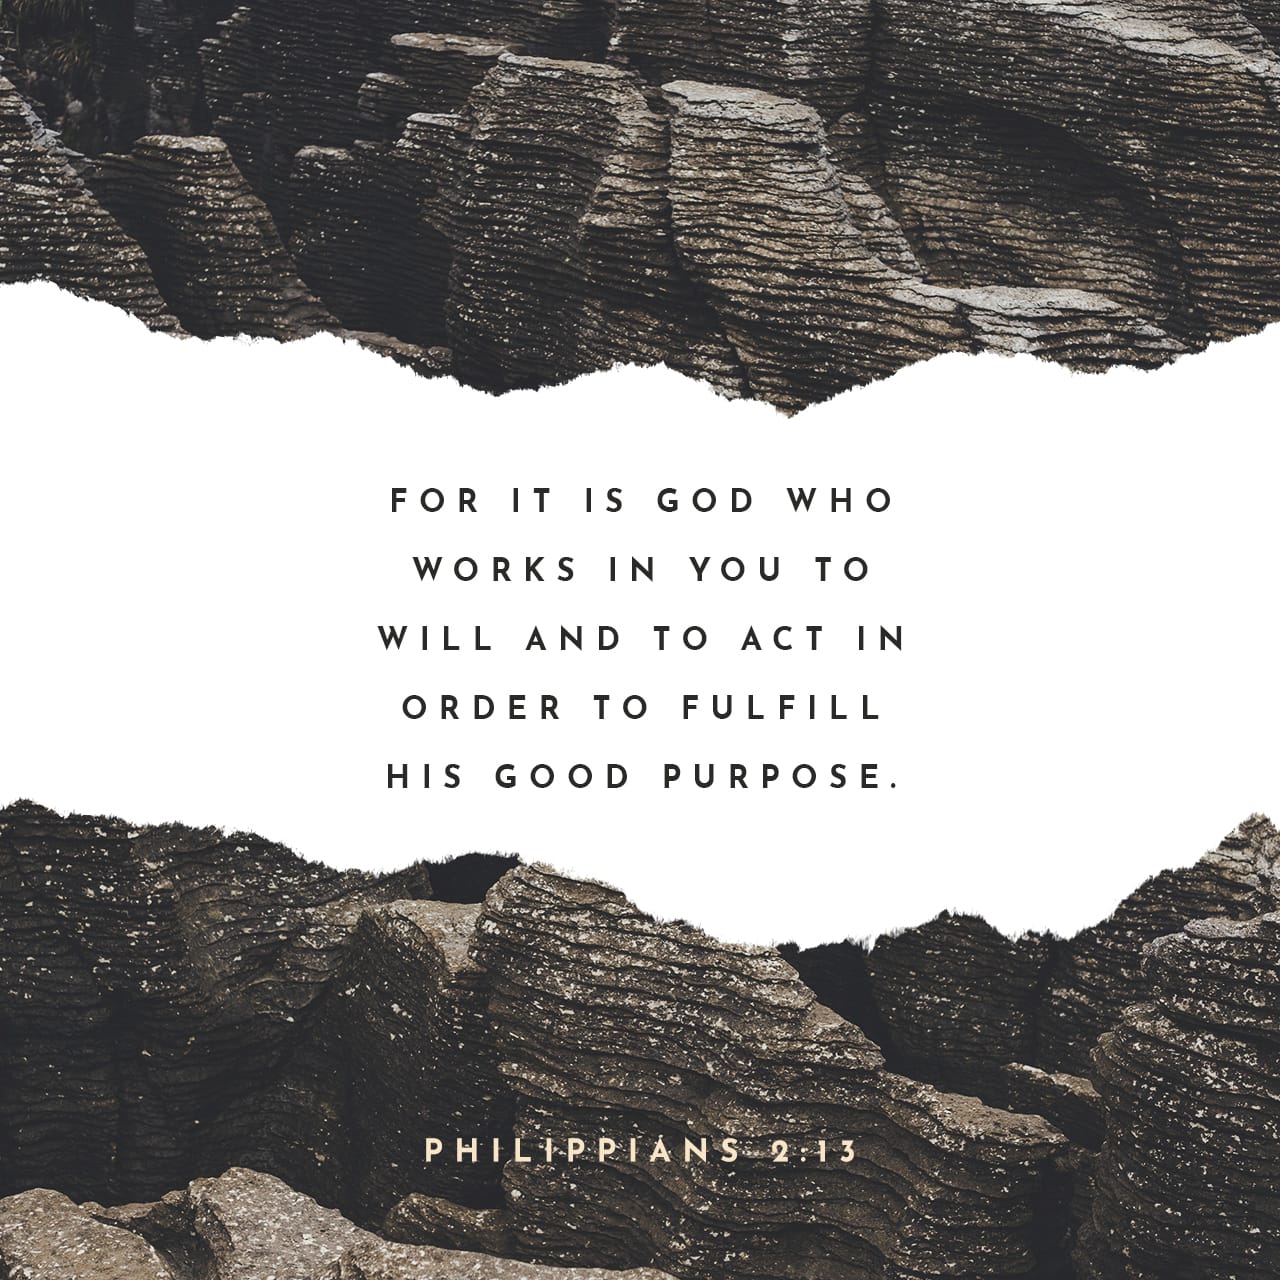 philippians-2-13-for-it-is-god-who-works-in-you-to-will-and-to-act-in-order-to-fulfill-his-good